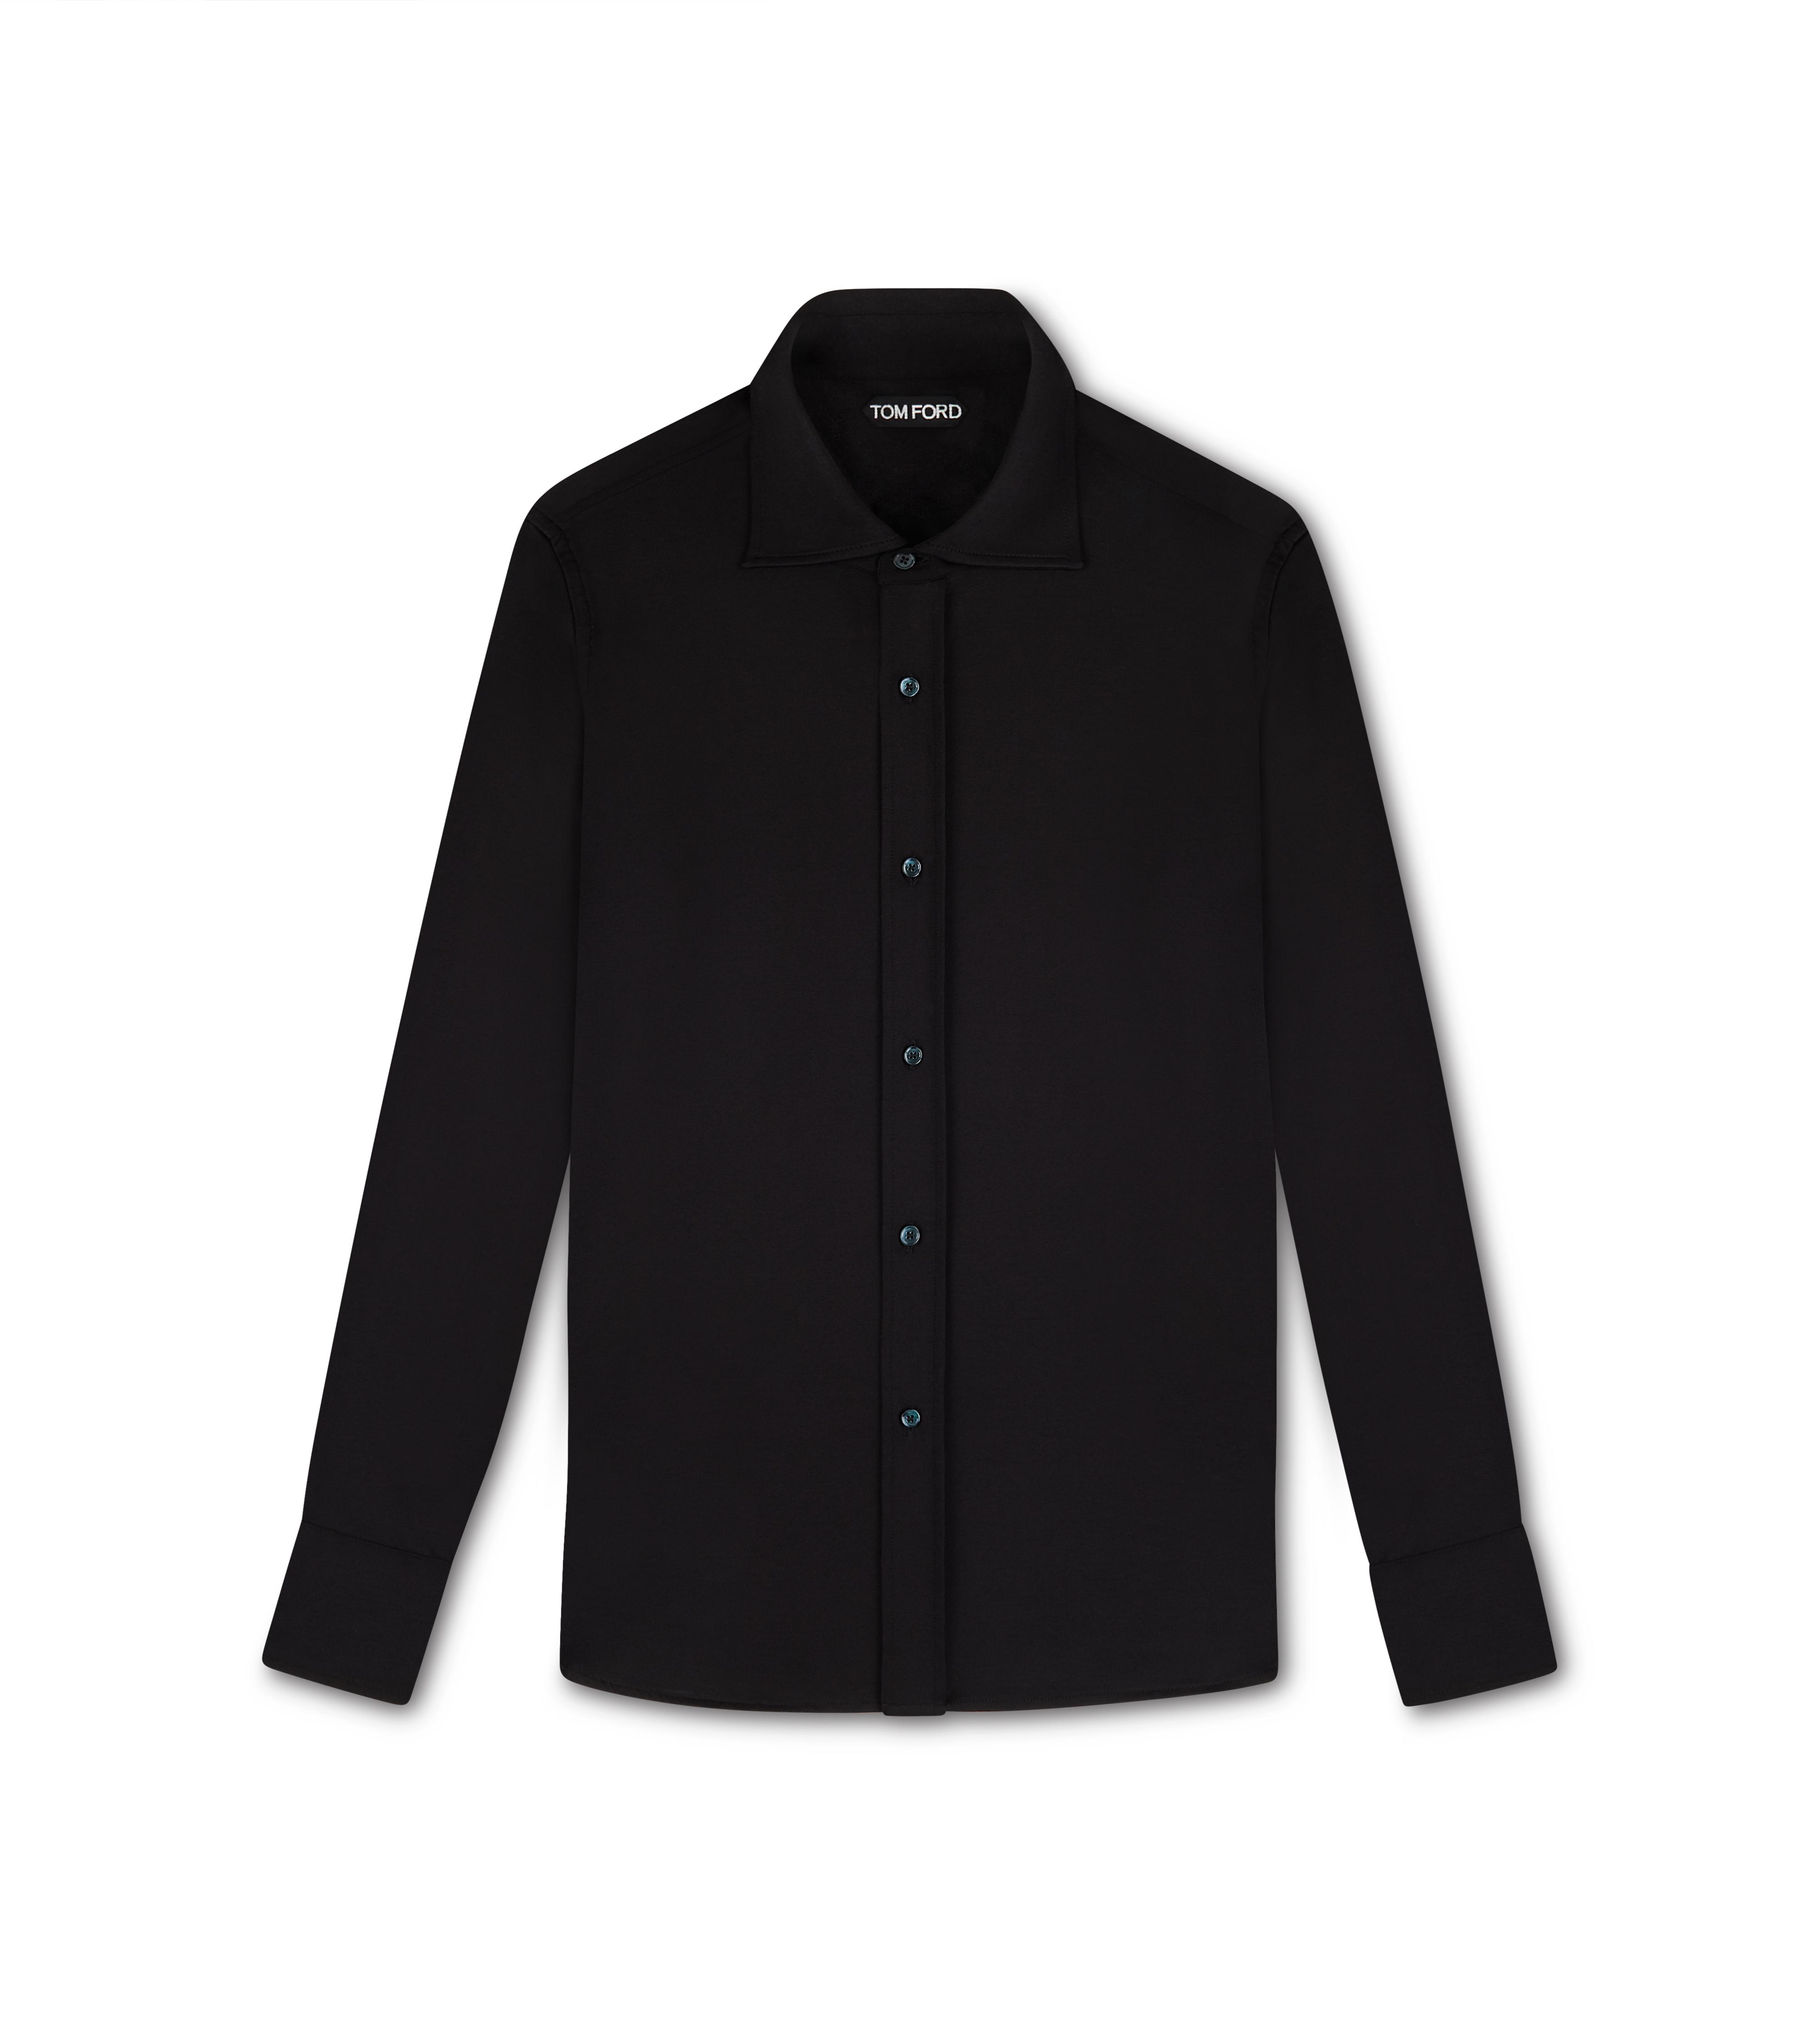 tom ford jersey shirt